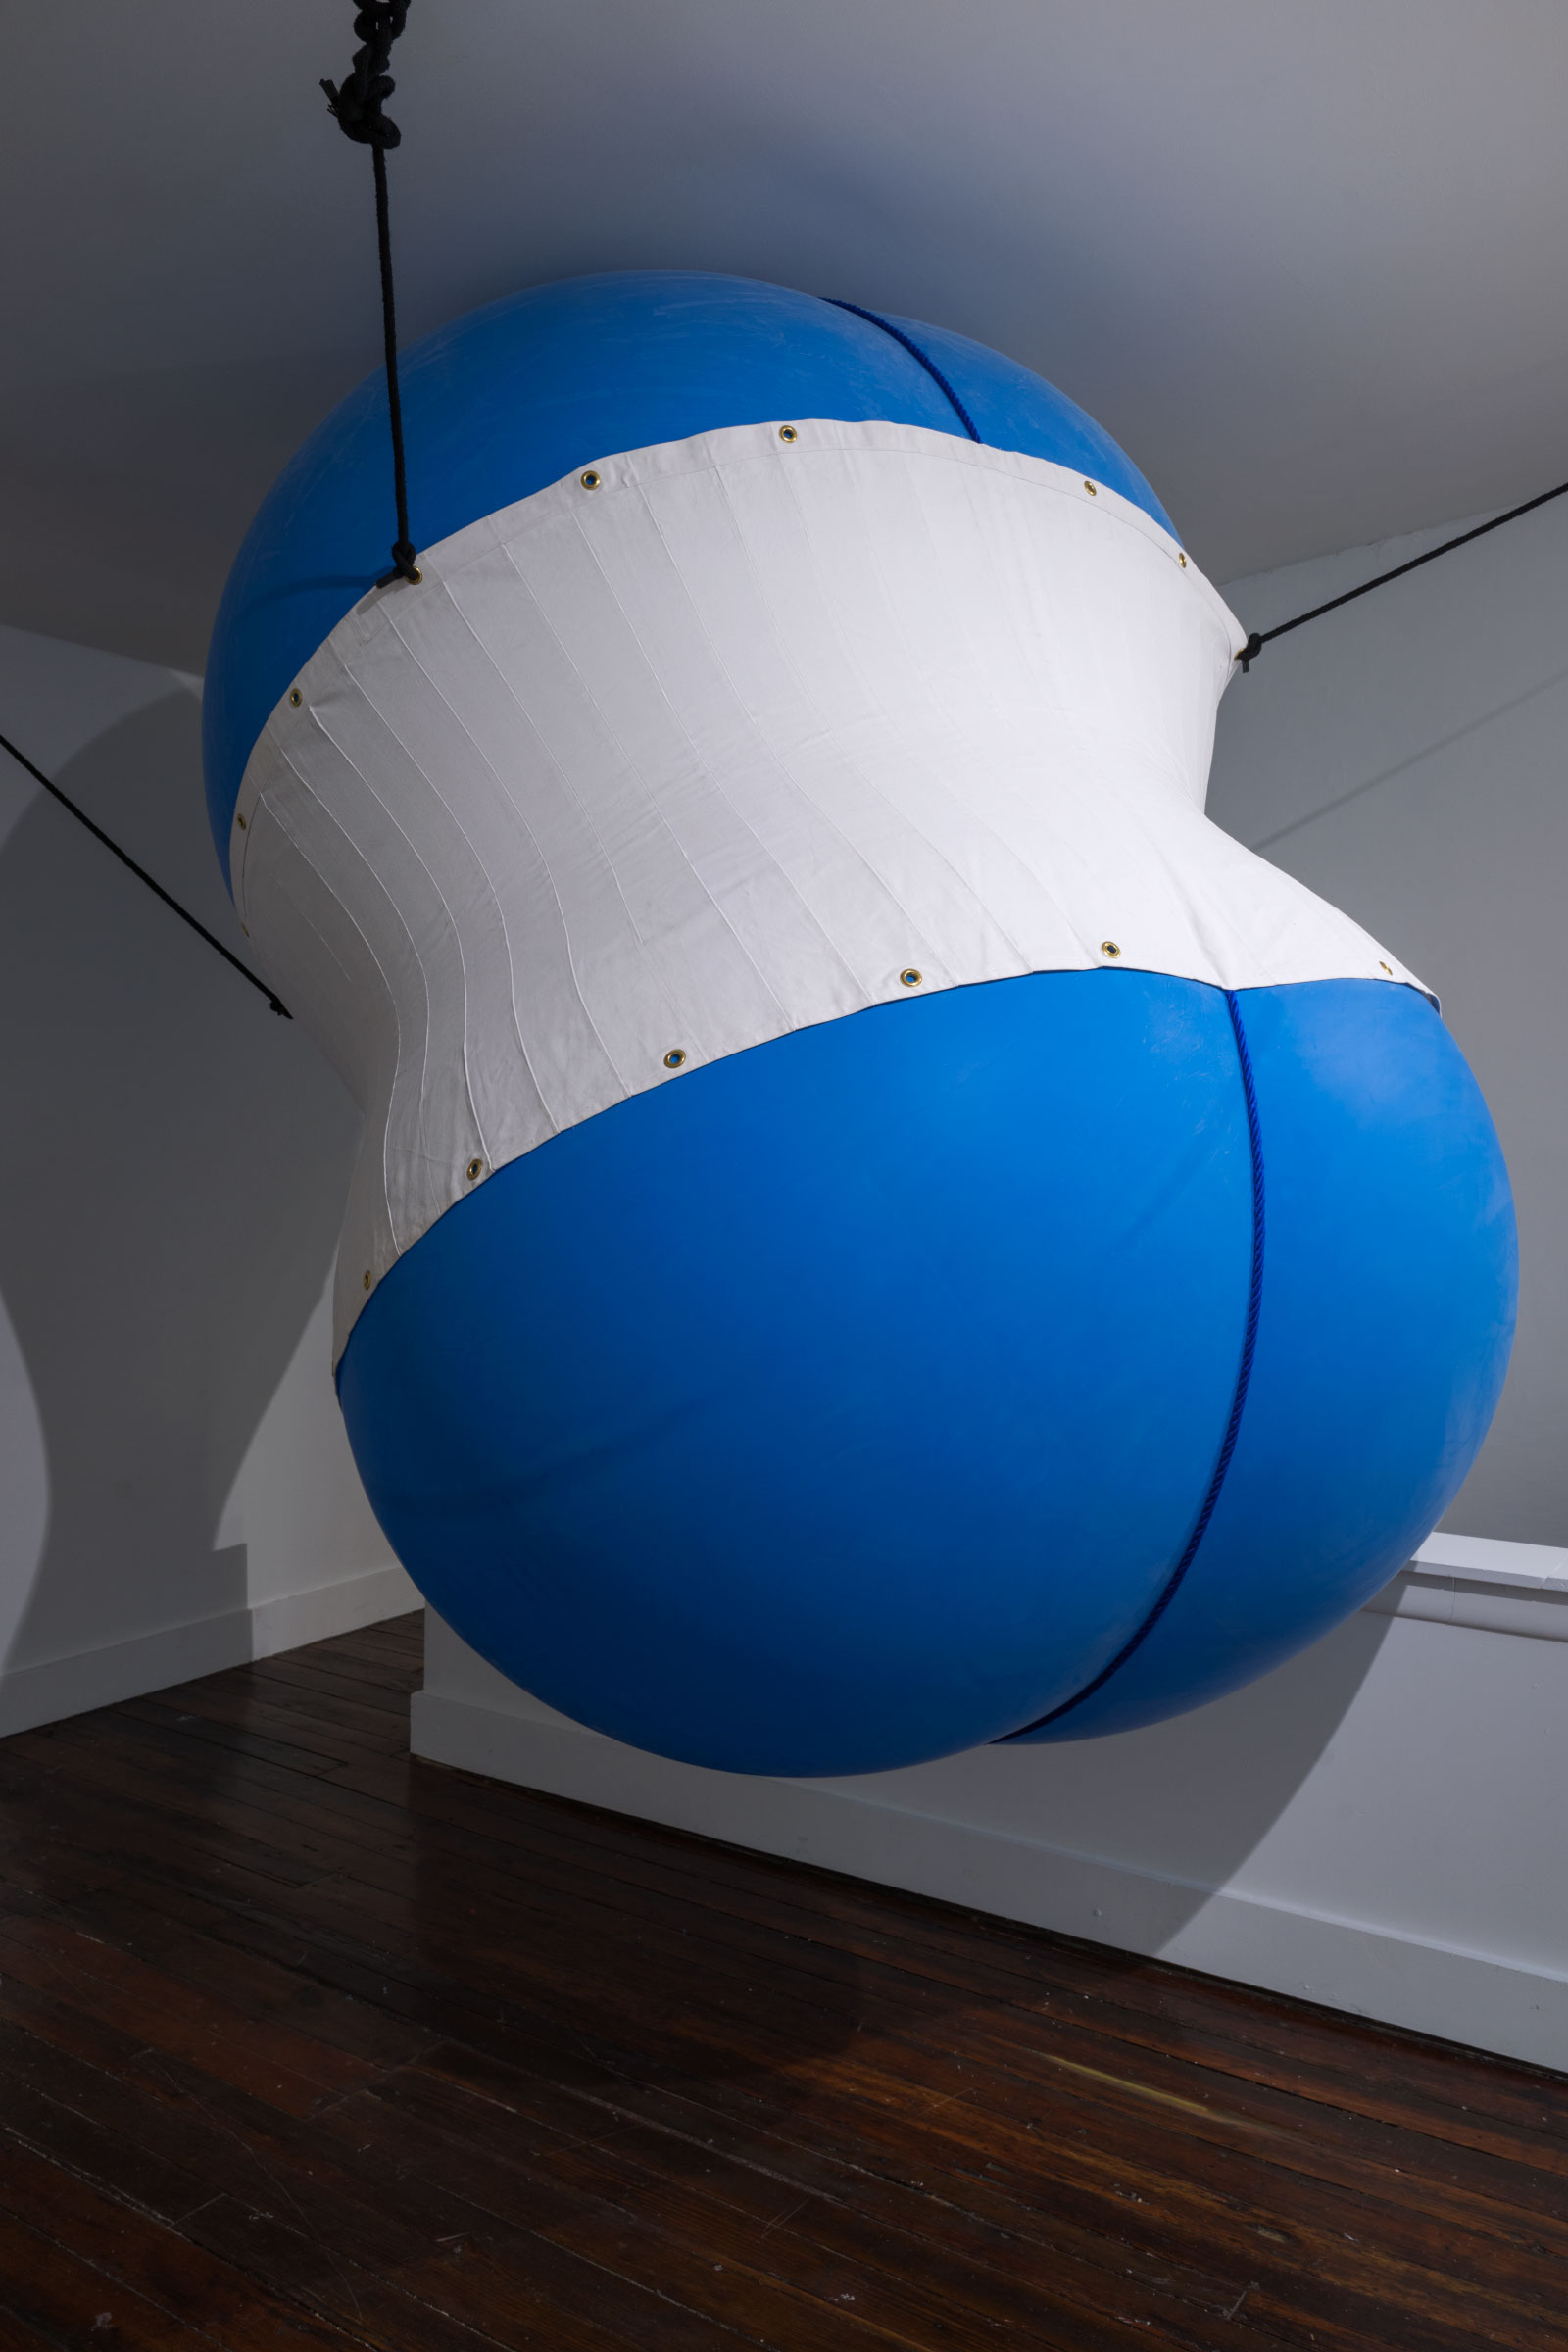 BLUE MOON, REAR VIEW, 76 X 60 X 60 INCHES, INSTALLATION VARIABLE, 1998